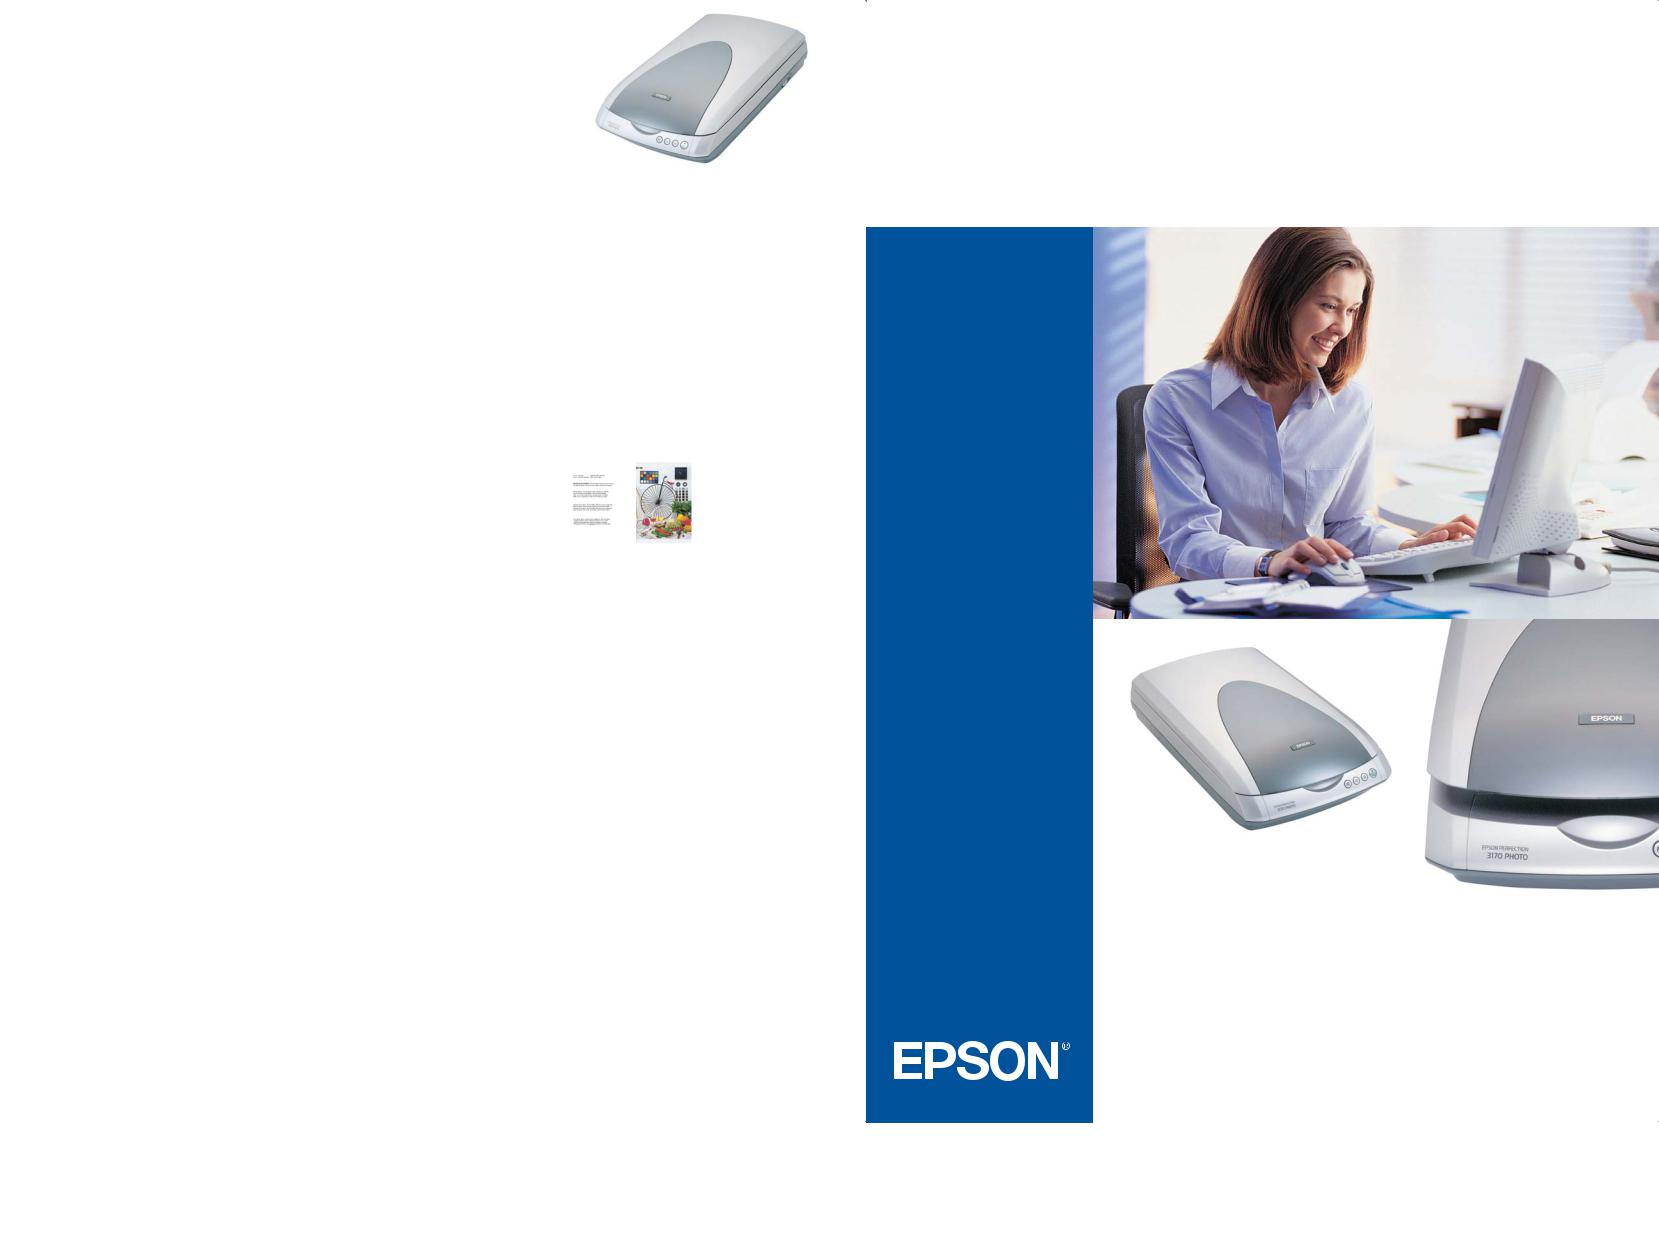 epson perfection 3170 photo driver software